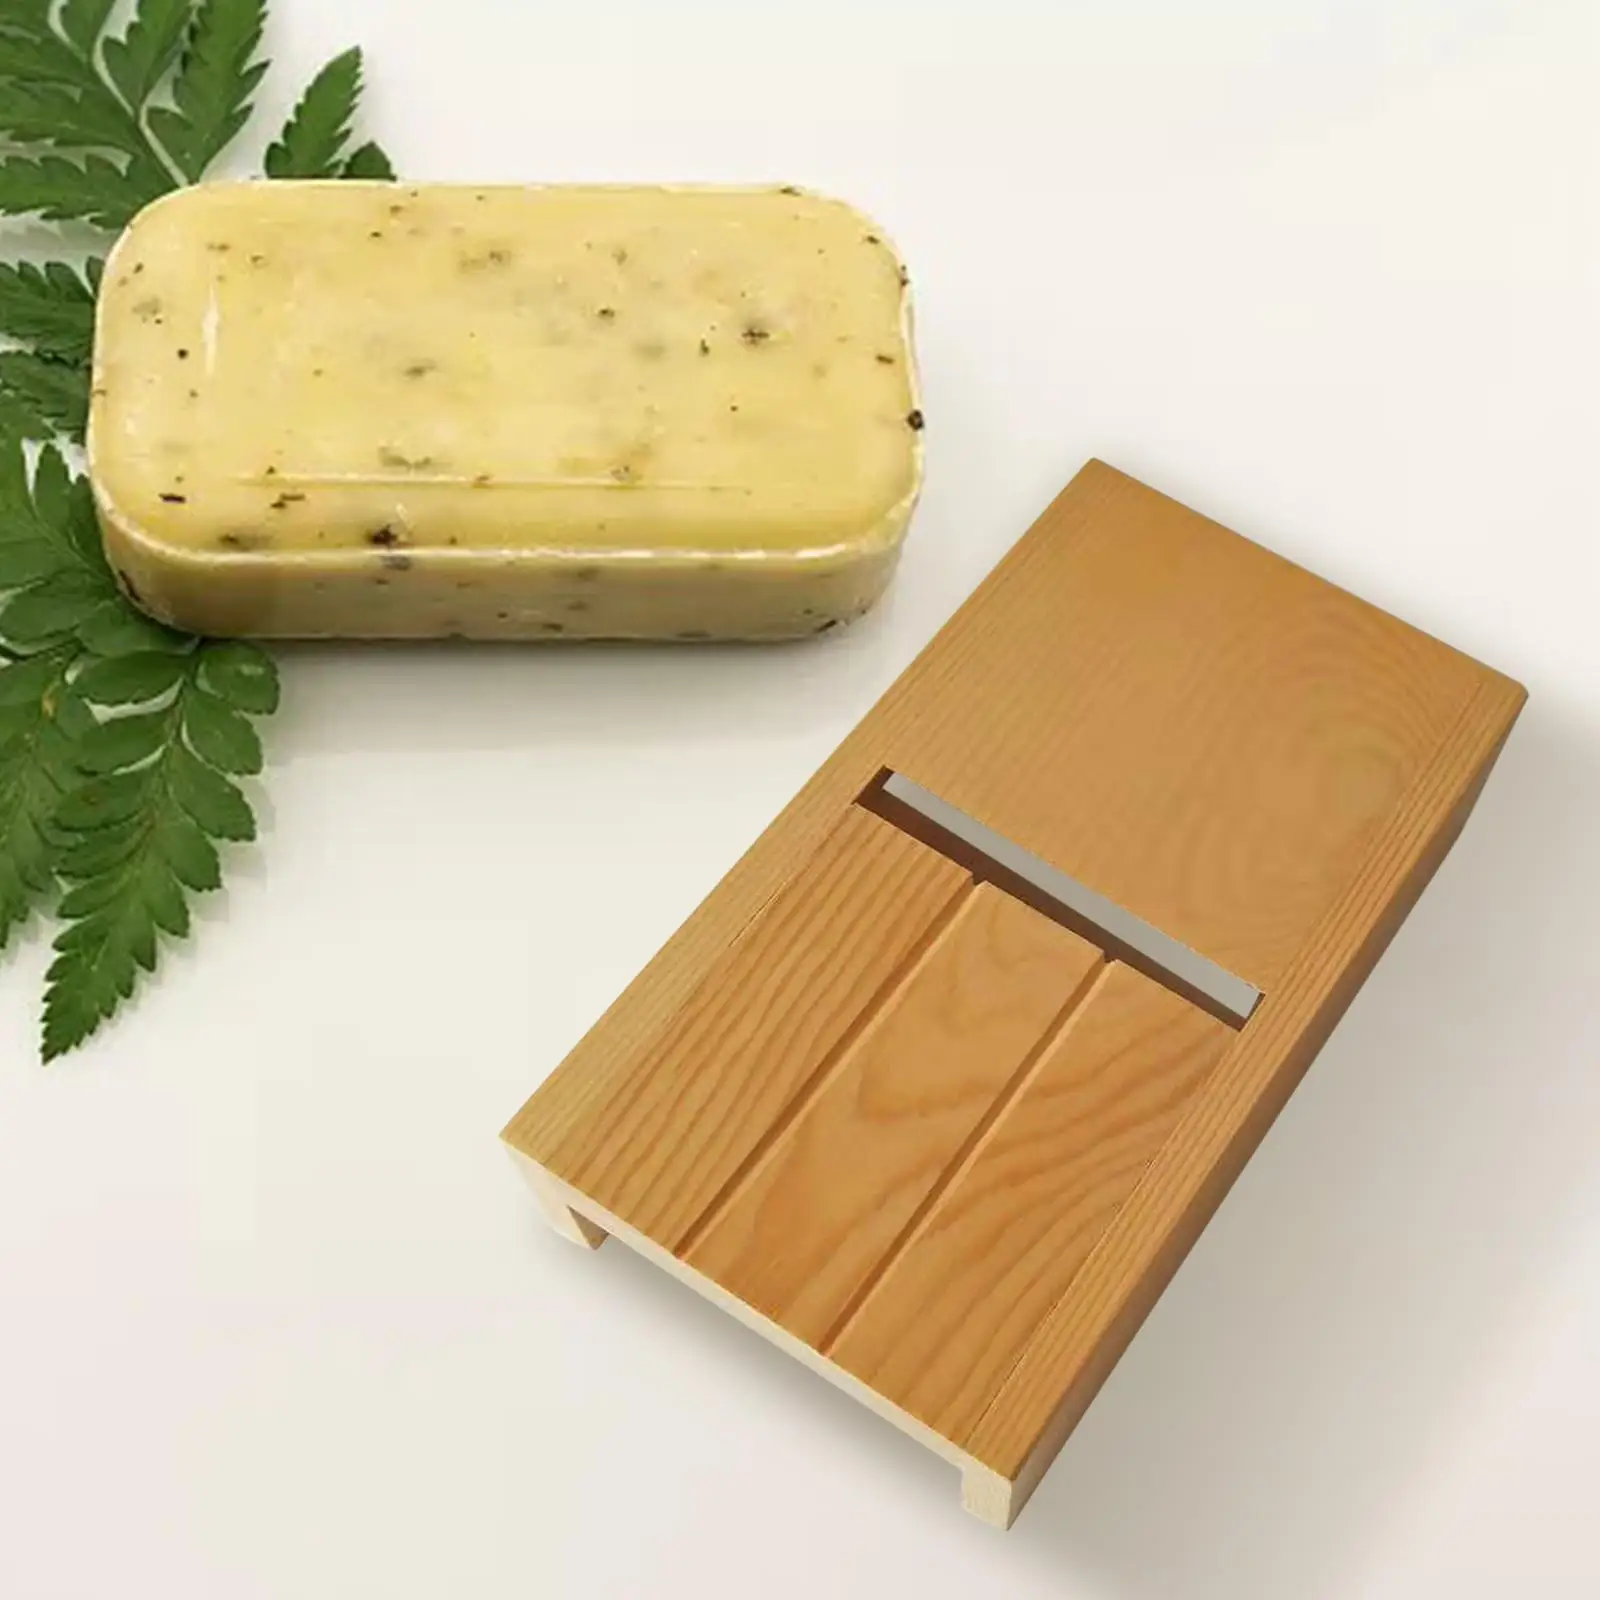 Wood Soap Cutter Mould Beveler Planer Soap Making Trimming Cutting Tool